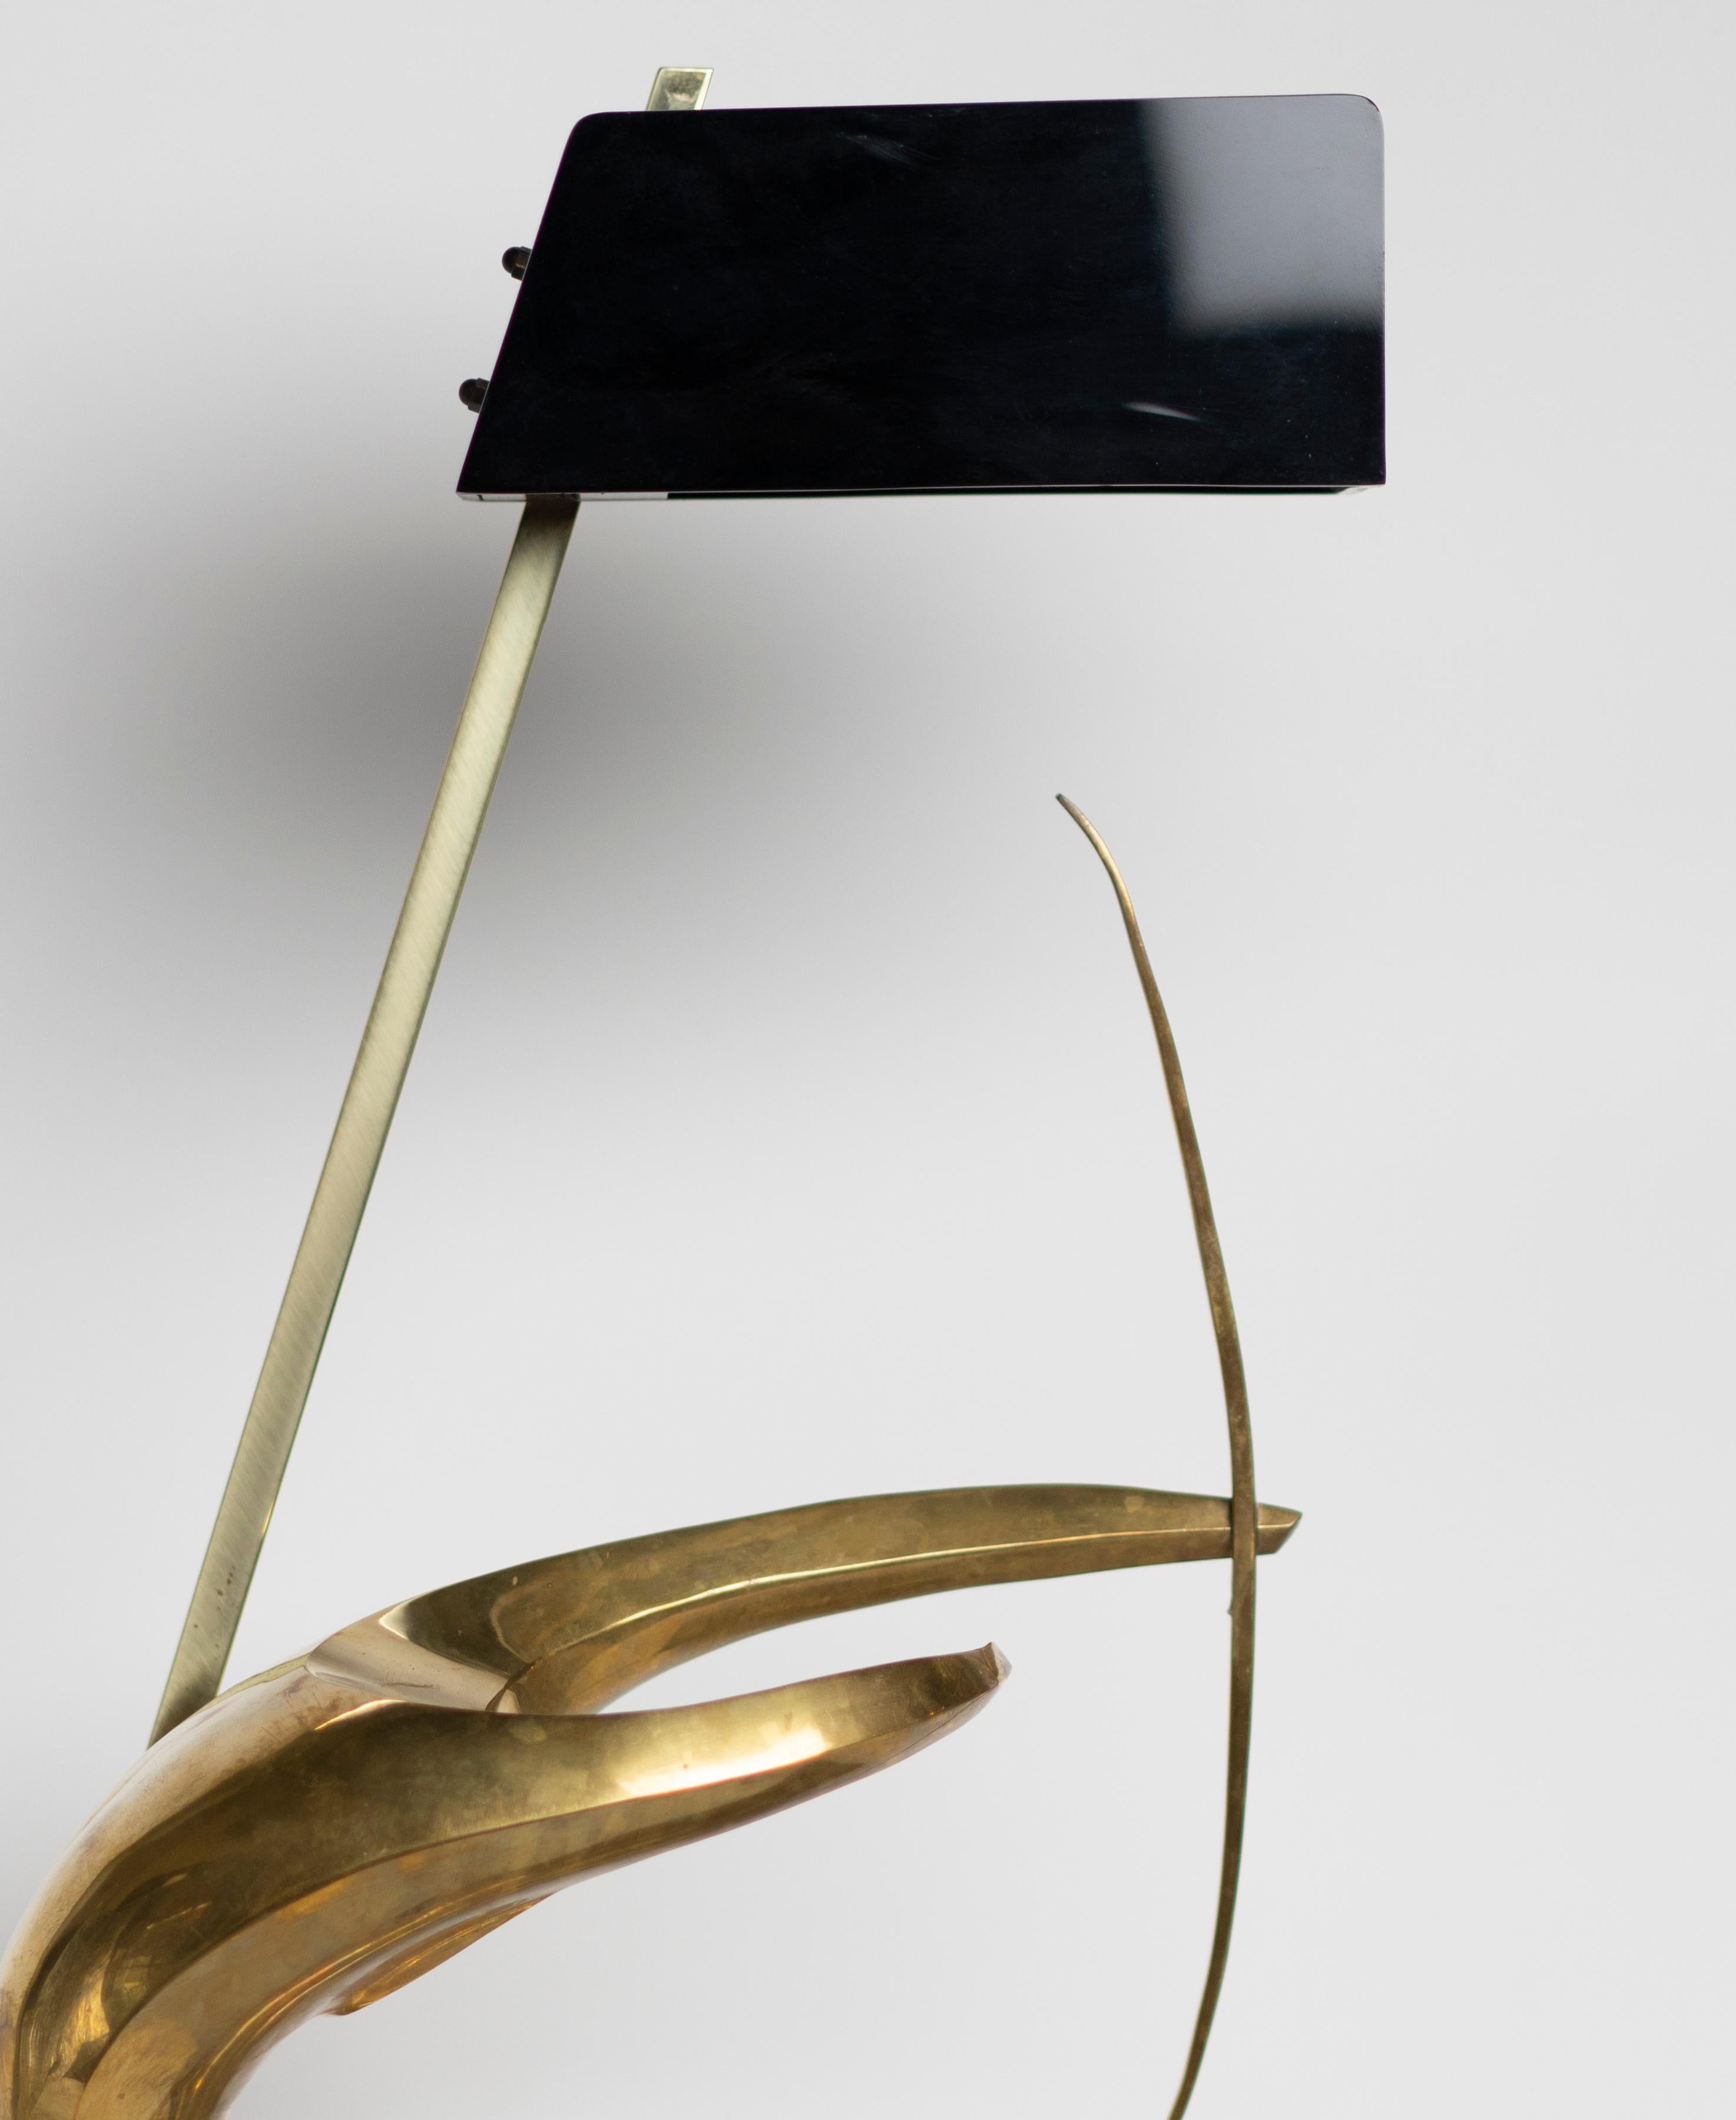 Gilt bronze table lamp representing an archer by Maxime Delo for Pragos
Signed engraved: 